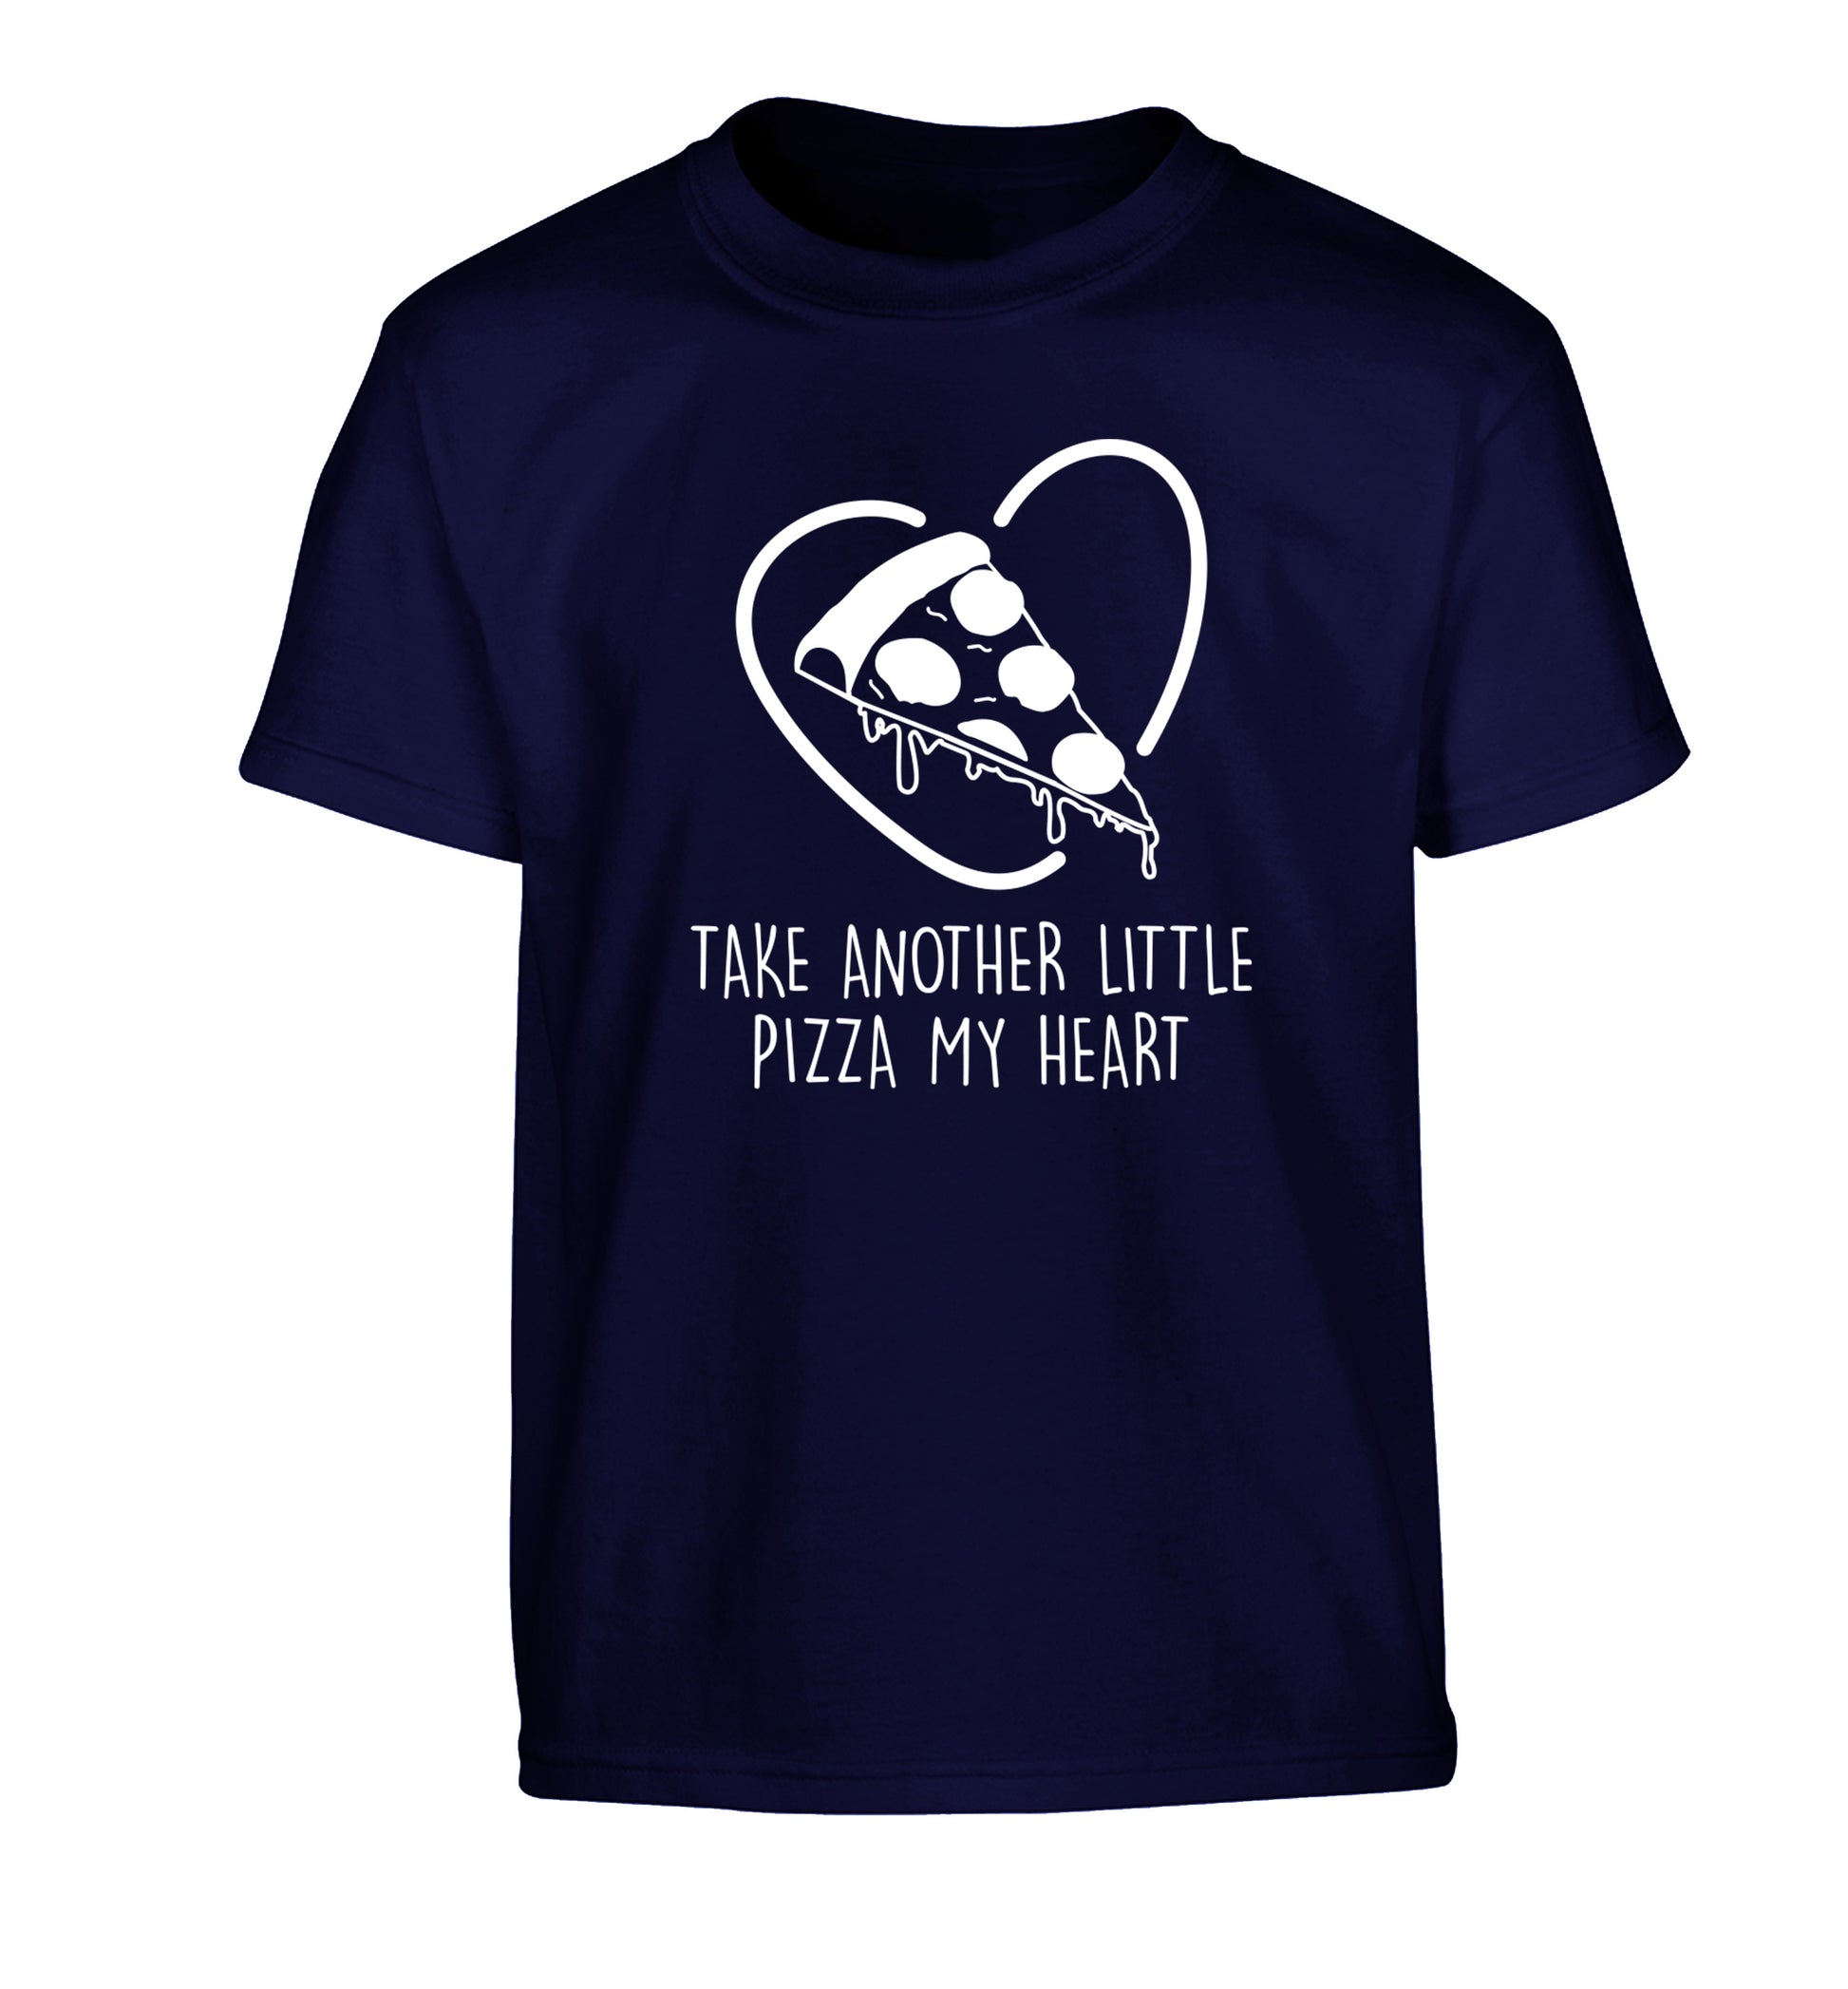 Take another little pizza my heart Children's navy Tshirt 12-13 Years